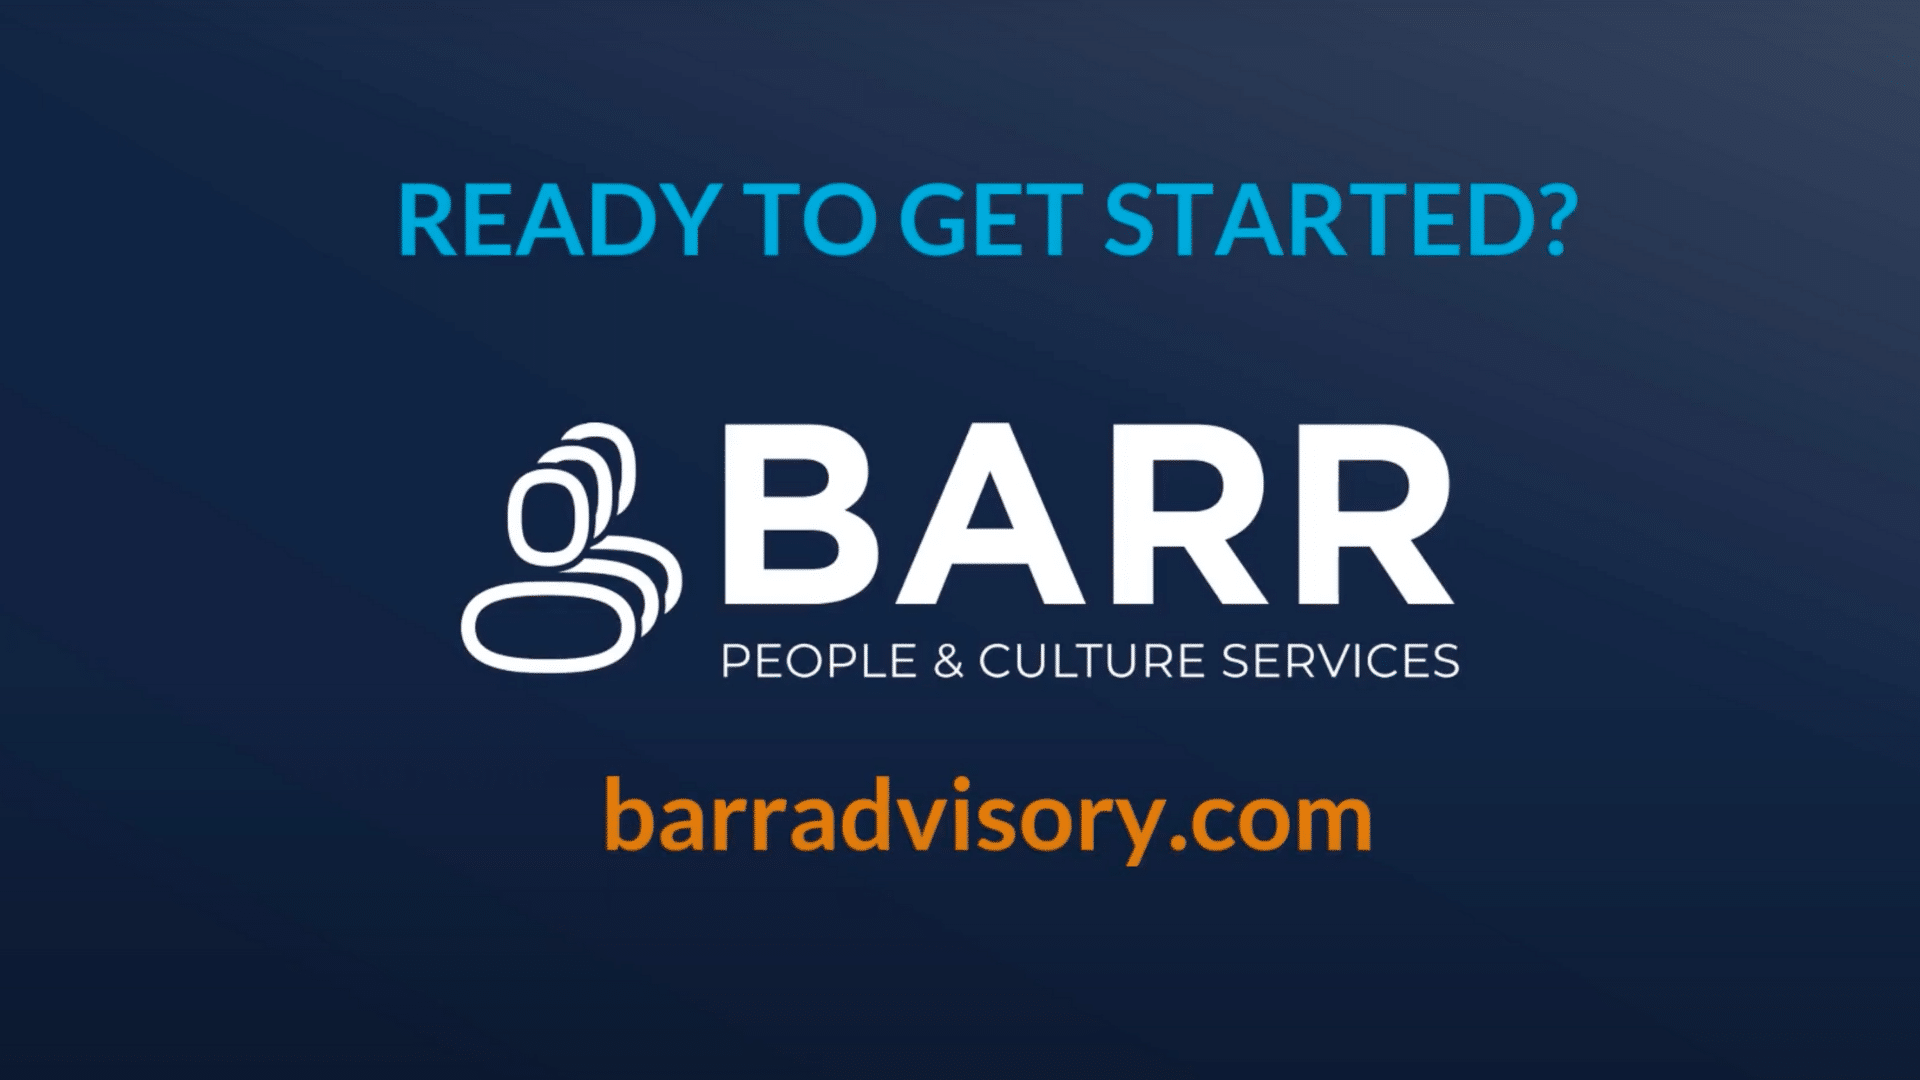 Introducing BARR People & Culture Services